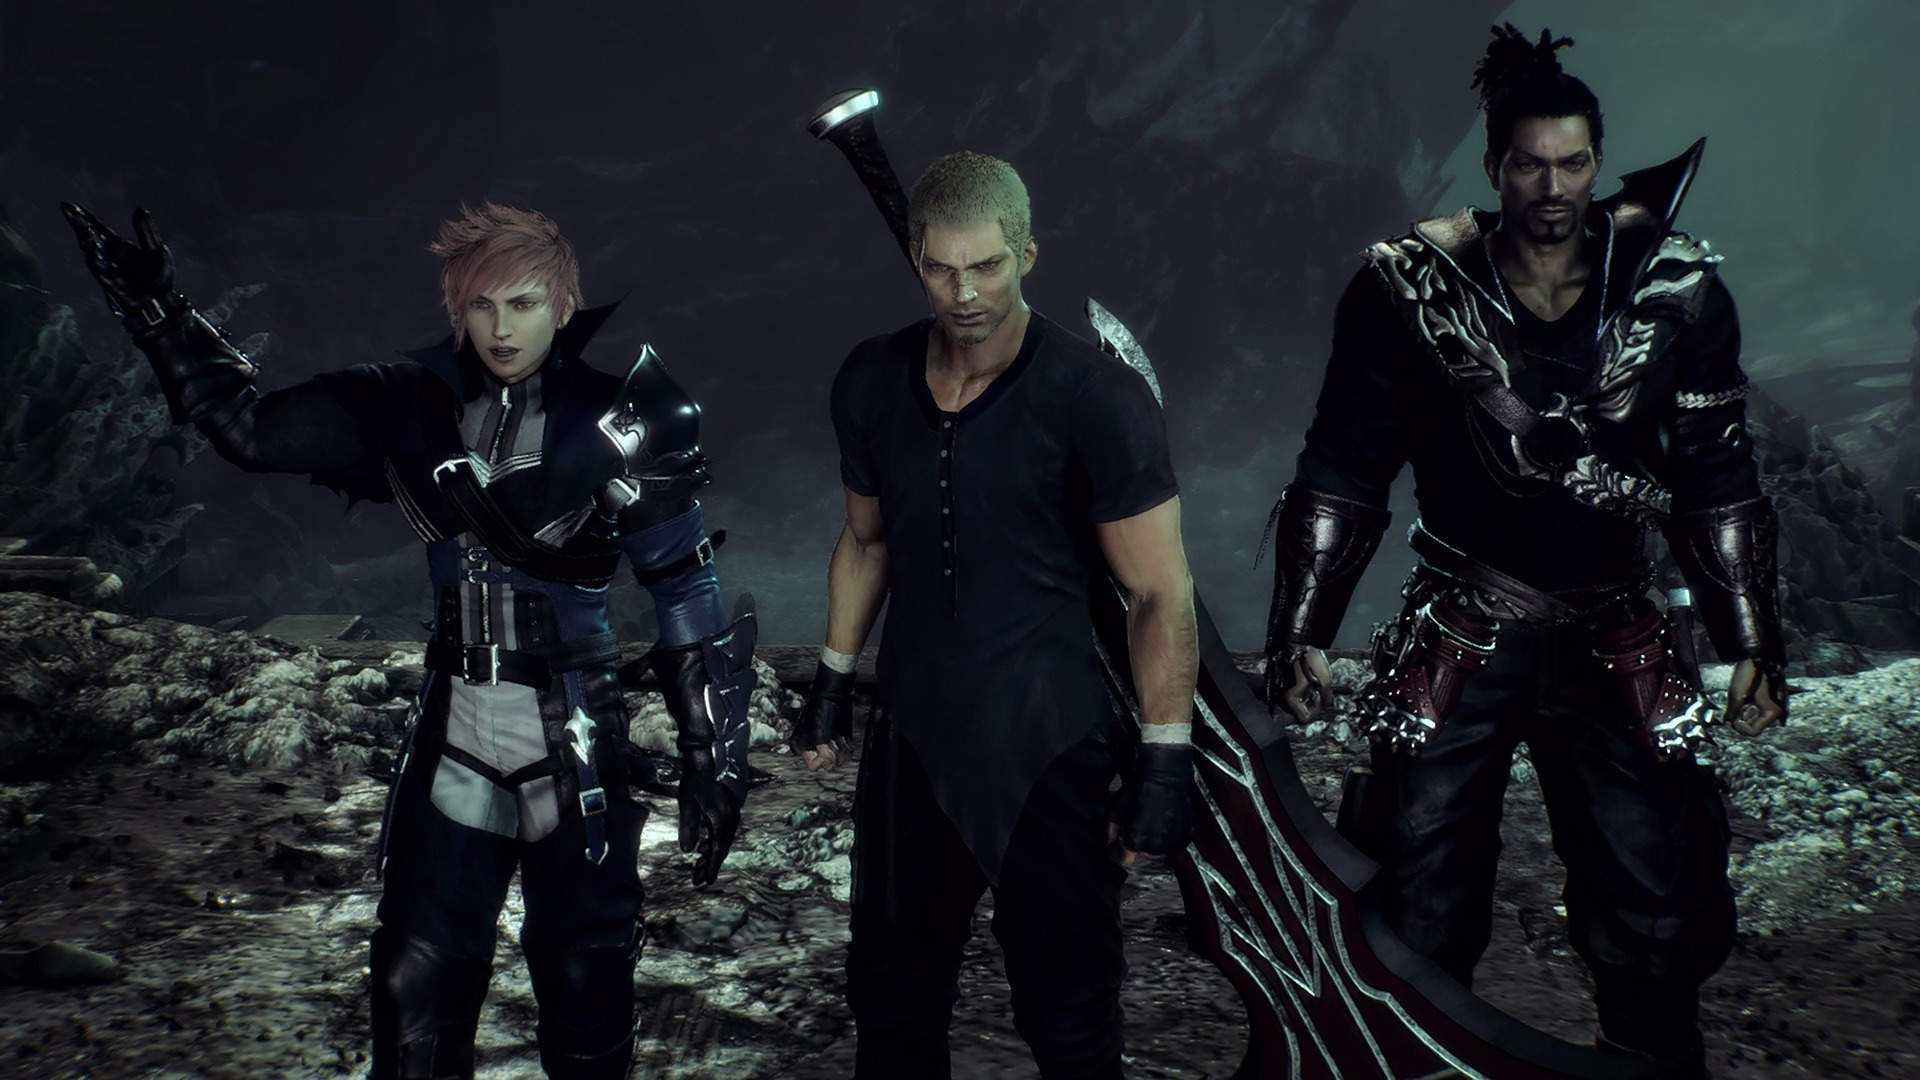 First Final Fantasy game to be reimagined in brand new action title